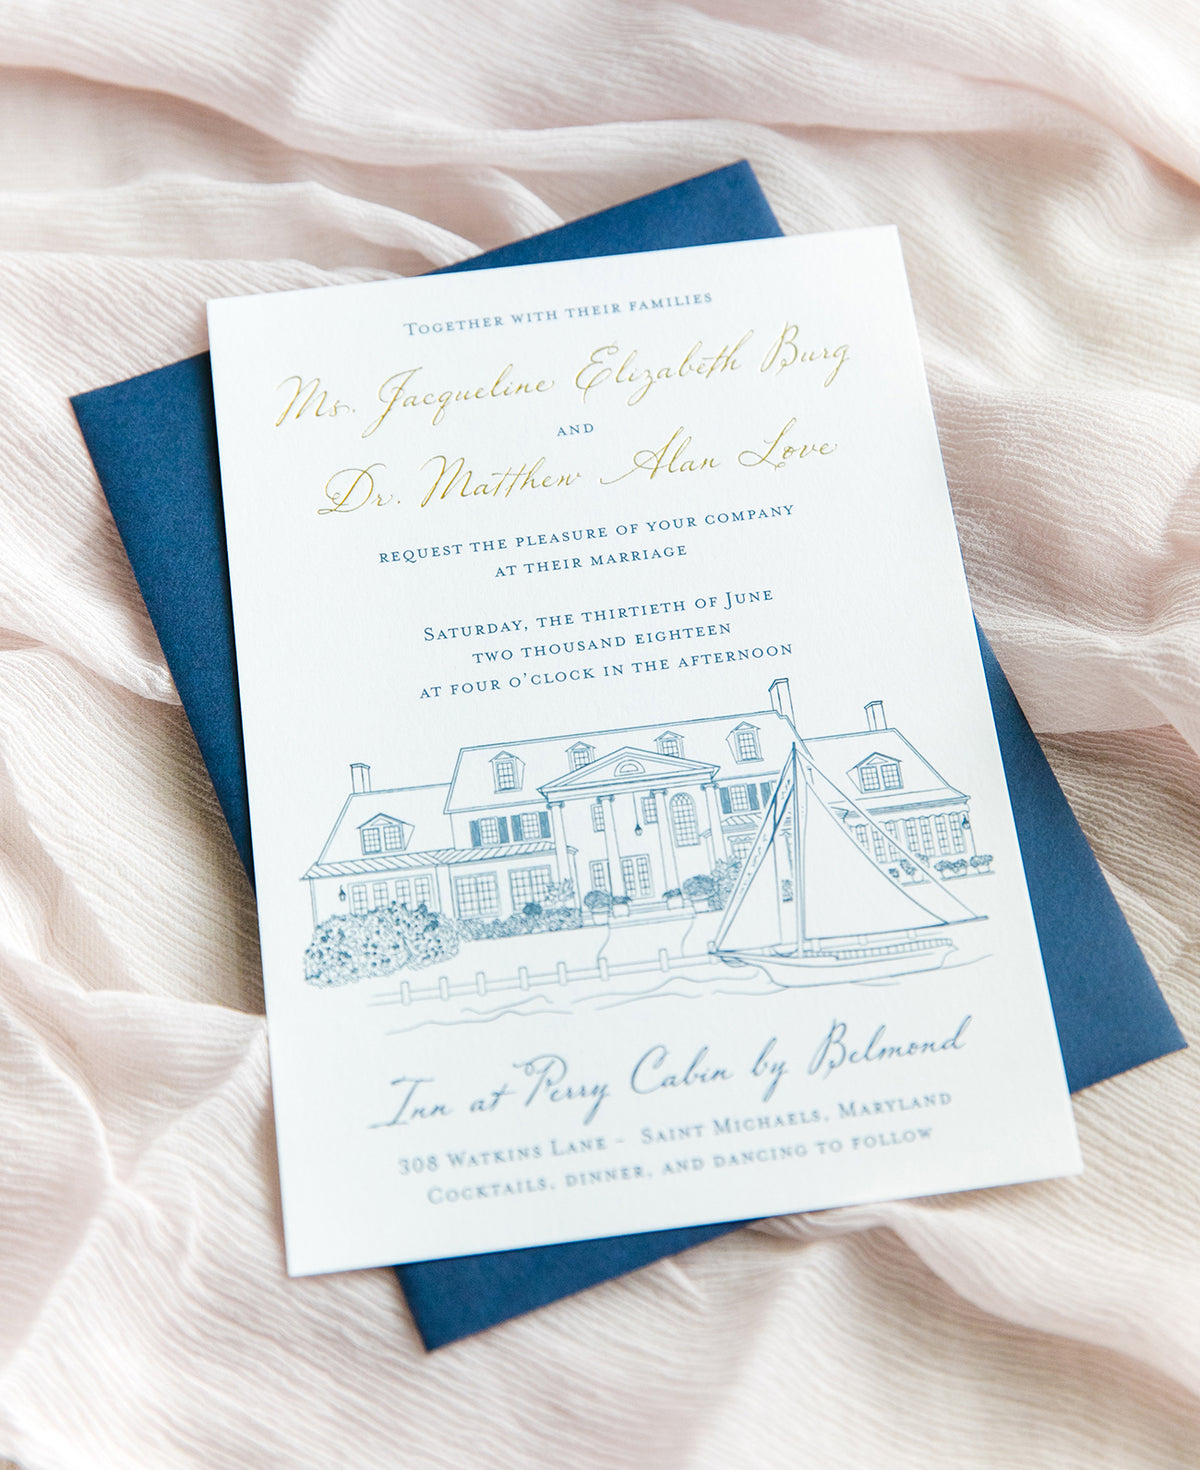 Inn at Perry Cabin Wedding Invitation by Scotti Cline Designs | Photo by Dana Cubbage Weddings